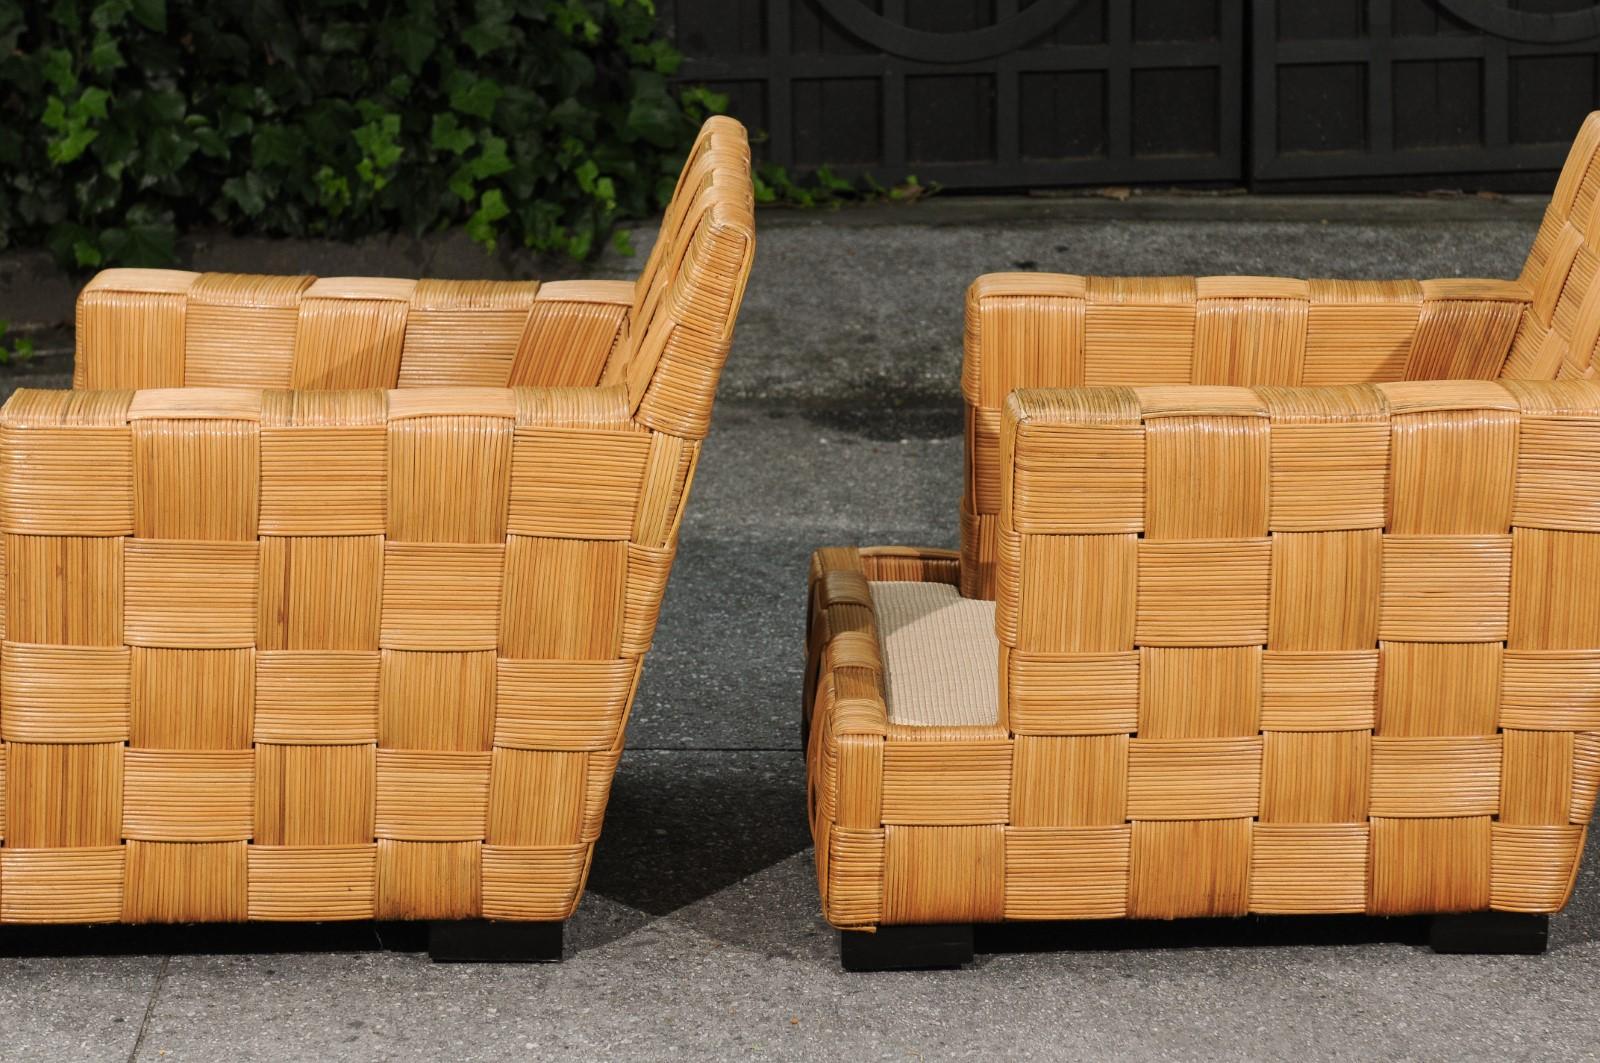 Unforgettable Set of of 4 Block Island Cane Chairs by John Hutton for Donghia For Sale 9